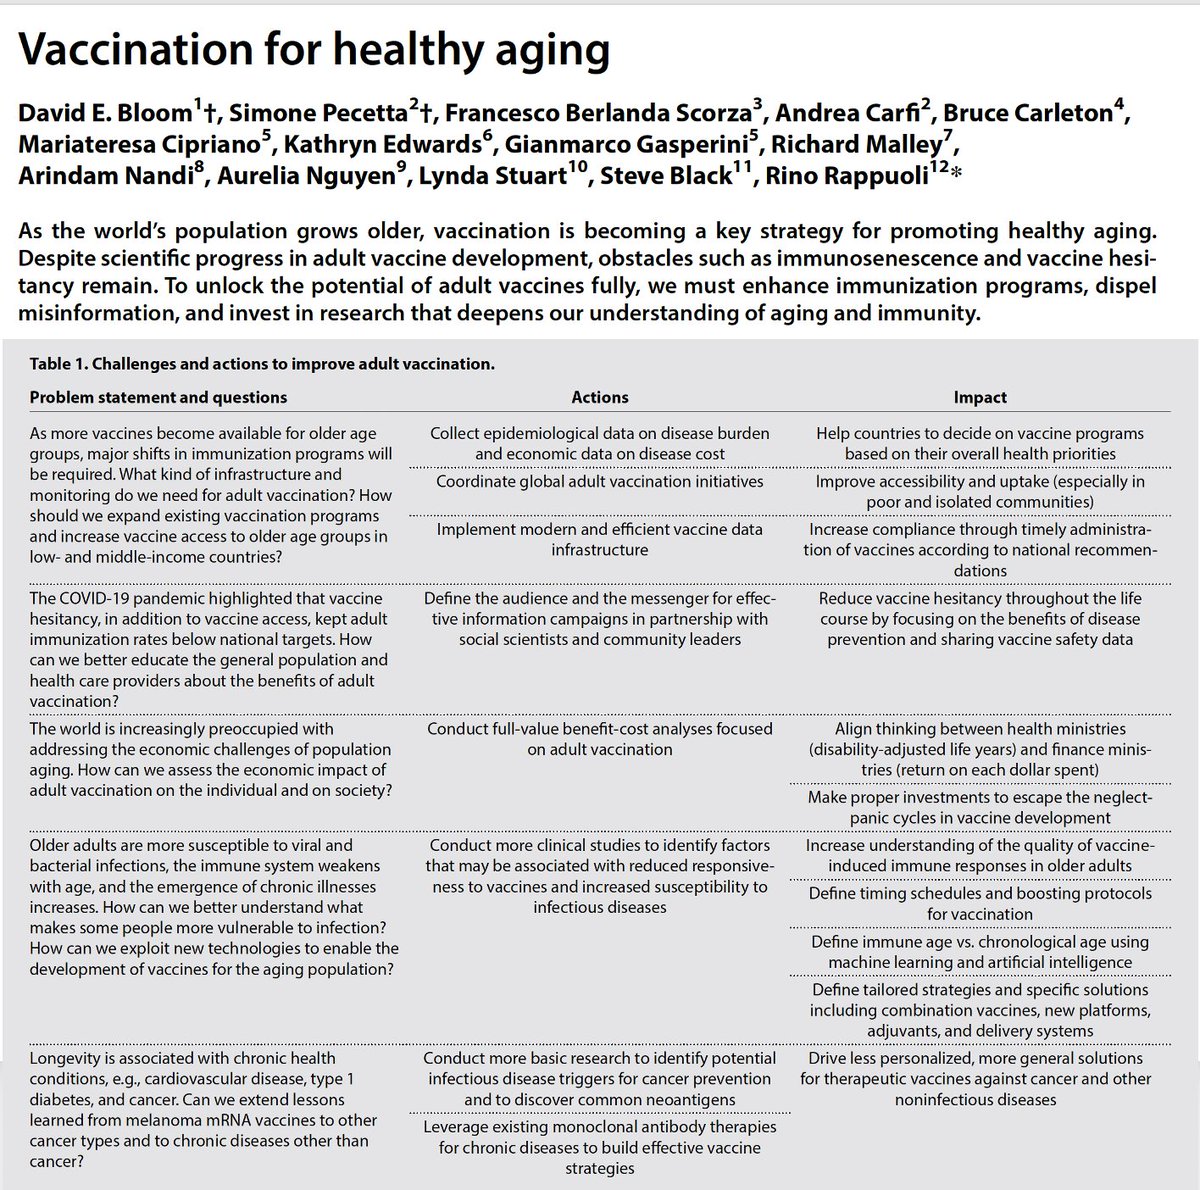 'Vaccination for Healthy Aging' We're seeing the potential for cancer vaccines. What if there were vaccines that promoted a durable, healthy immune response and prevented immunosenescence? science.org/doi/10.1126/sc… @ScienceTM